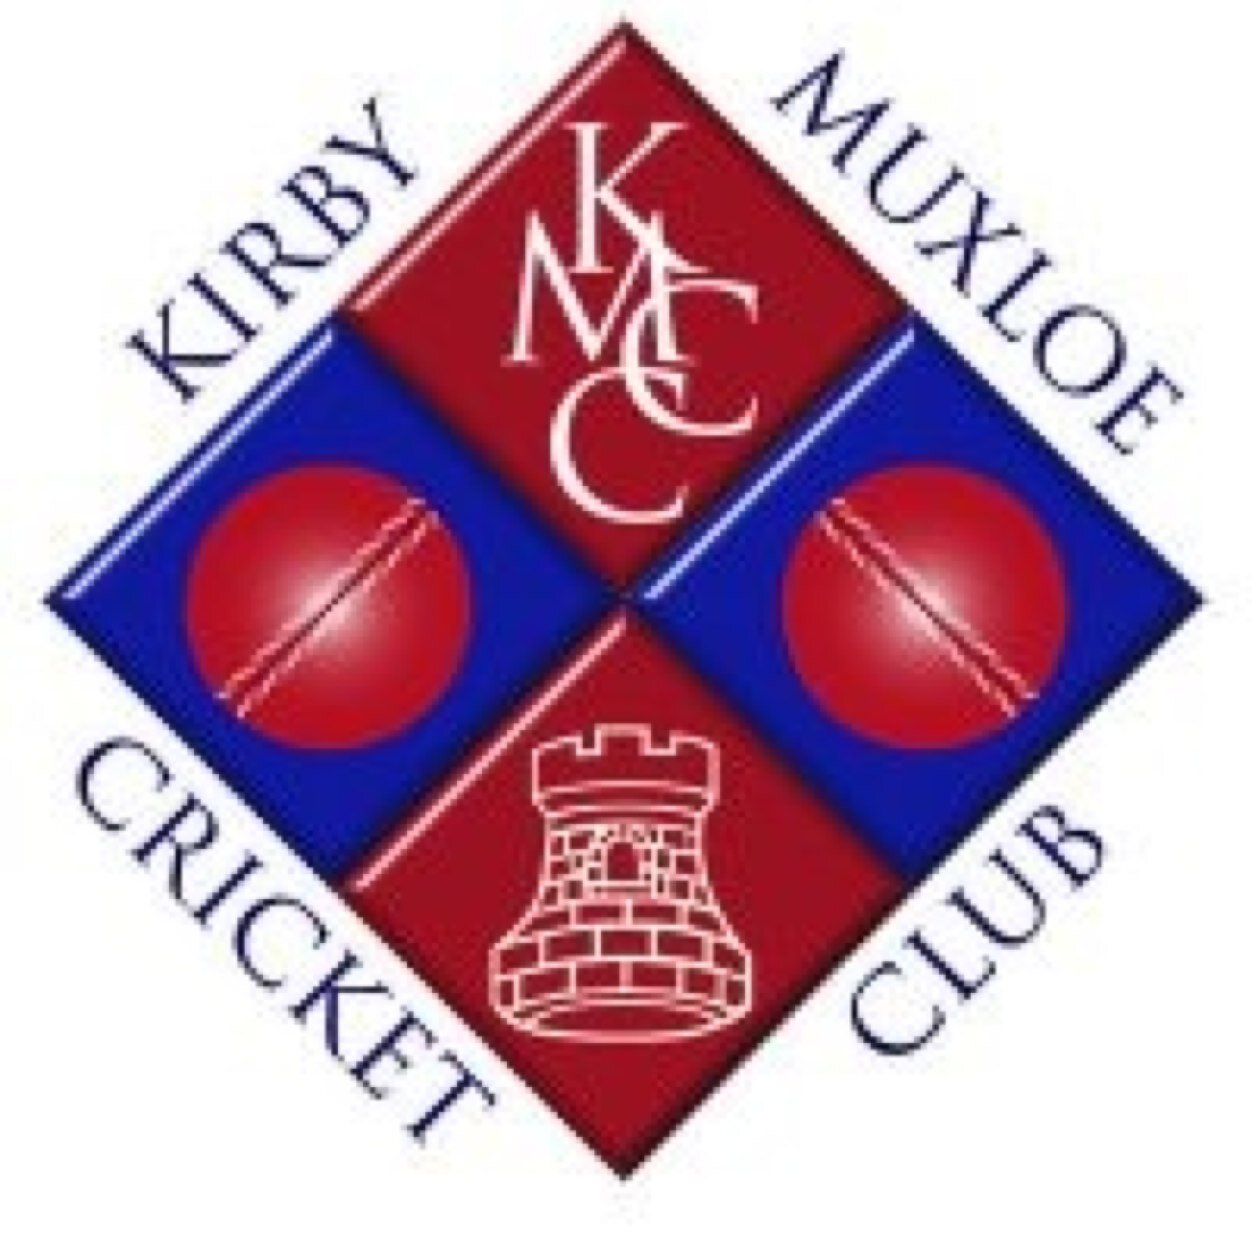 Account of Kirby Muxloe Cricket Club Clubmark Accredited club, with qualified coaches. New players always welcome https://t.co/BJiRPsf6HL